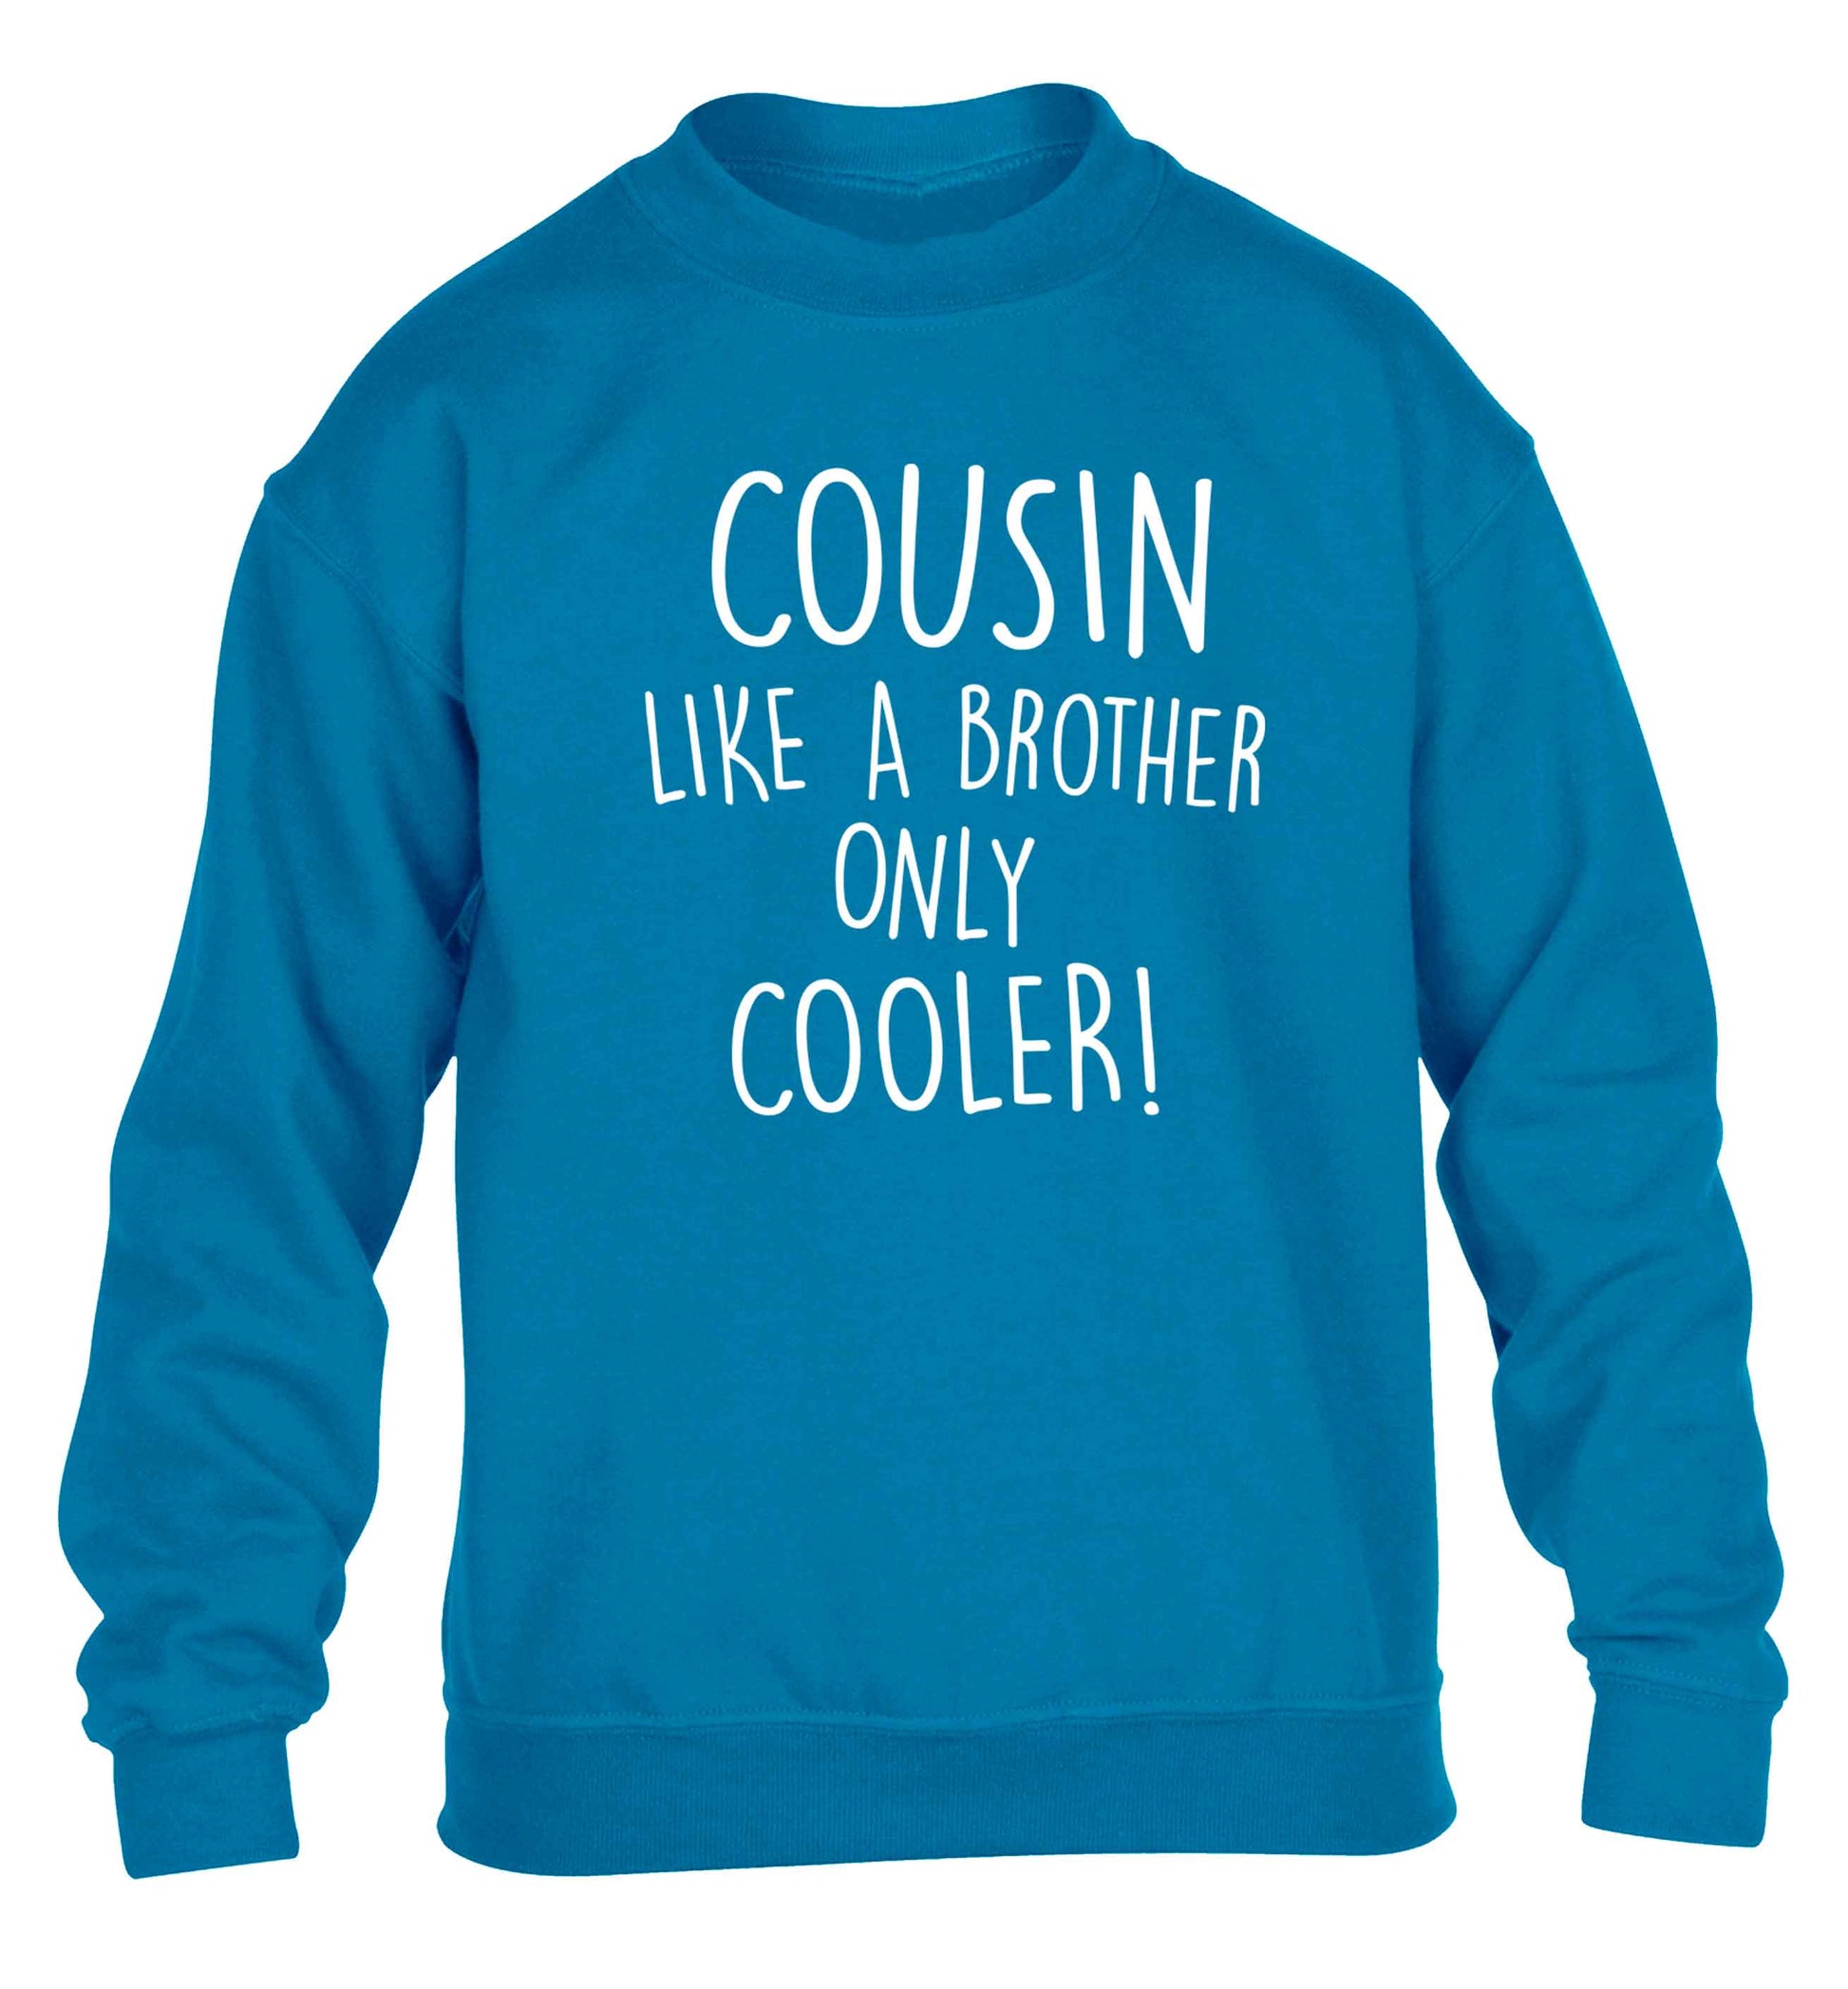 Cousin like a brother only cooler children's blue sweater 12-13 Years